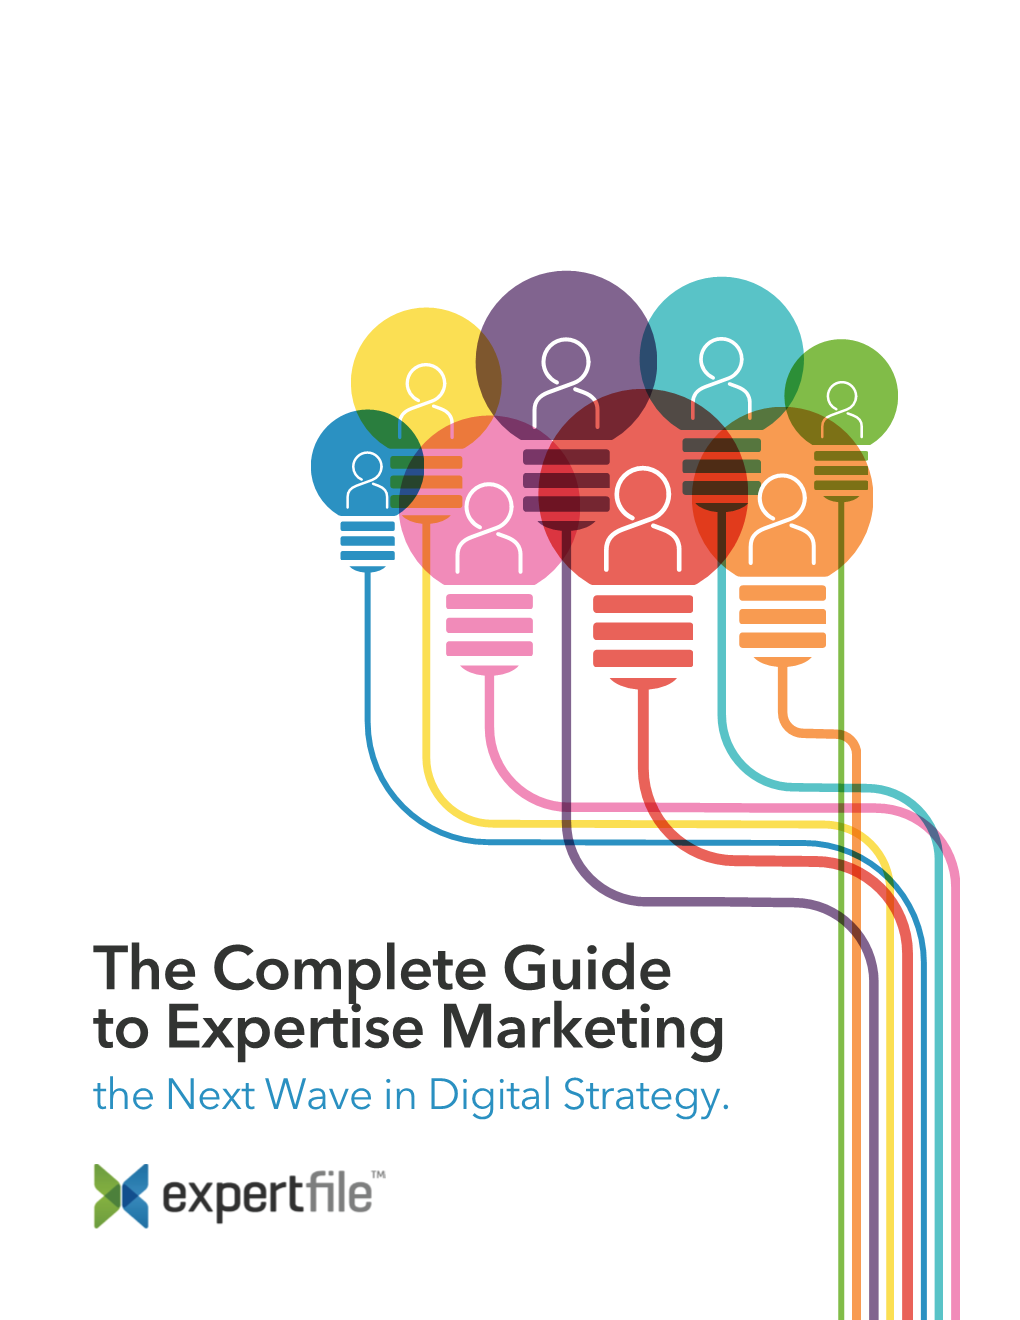 The Complete Guide to Expertise Marketing the Next Wave in Digital Strategy